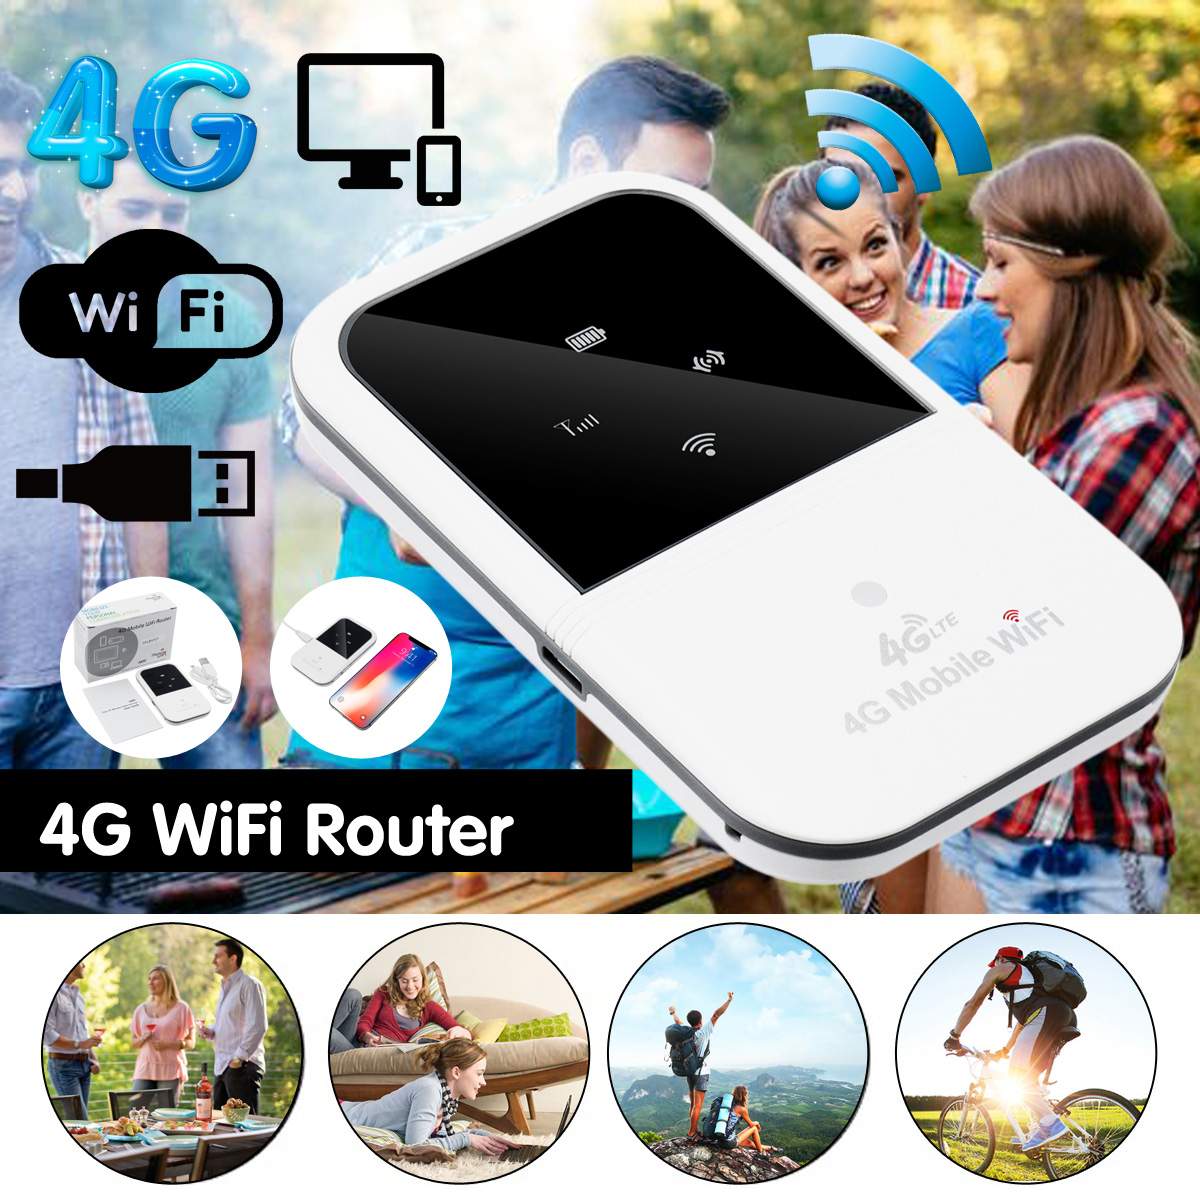 A800 4G Wireless Router Portable WiFi 802.11 b/g/n 4G 150Mbps Portable Router 4G Hotspot With SIM Slot Wireless Routers Repeater